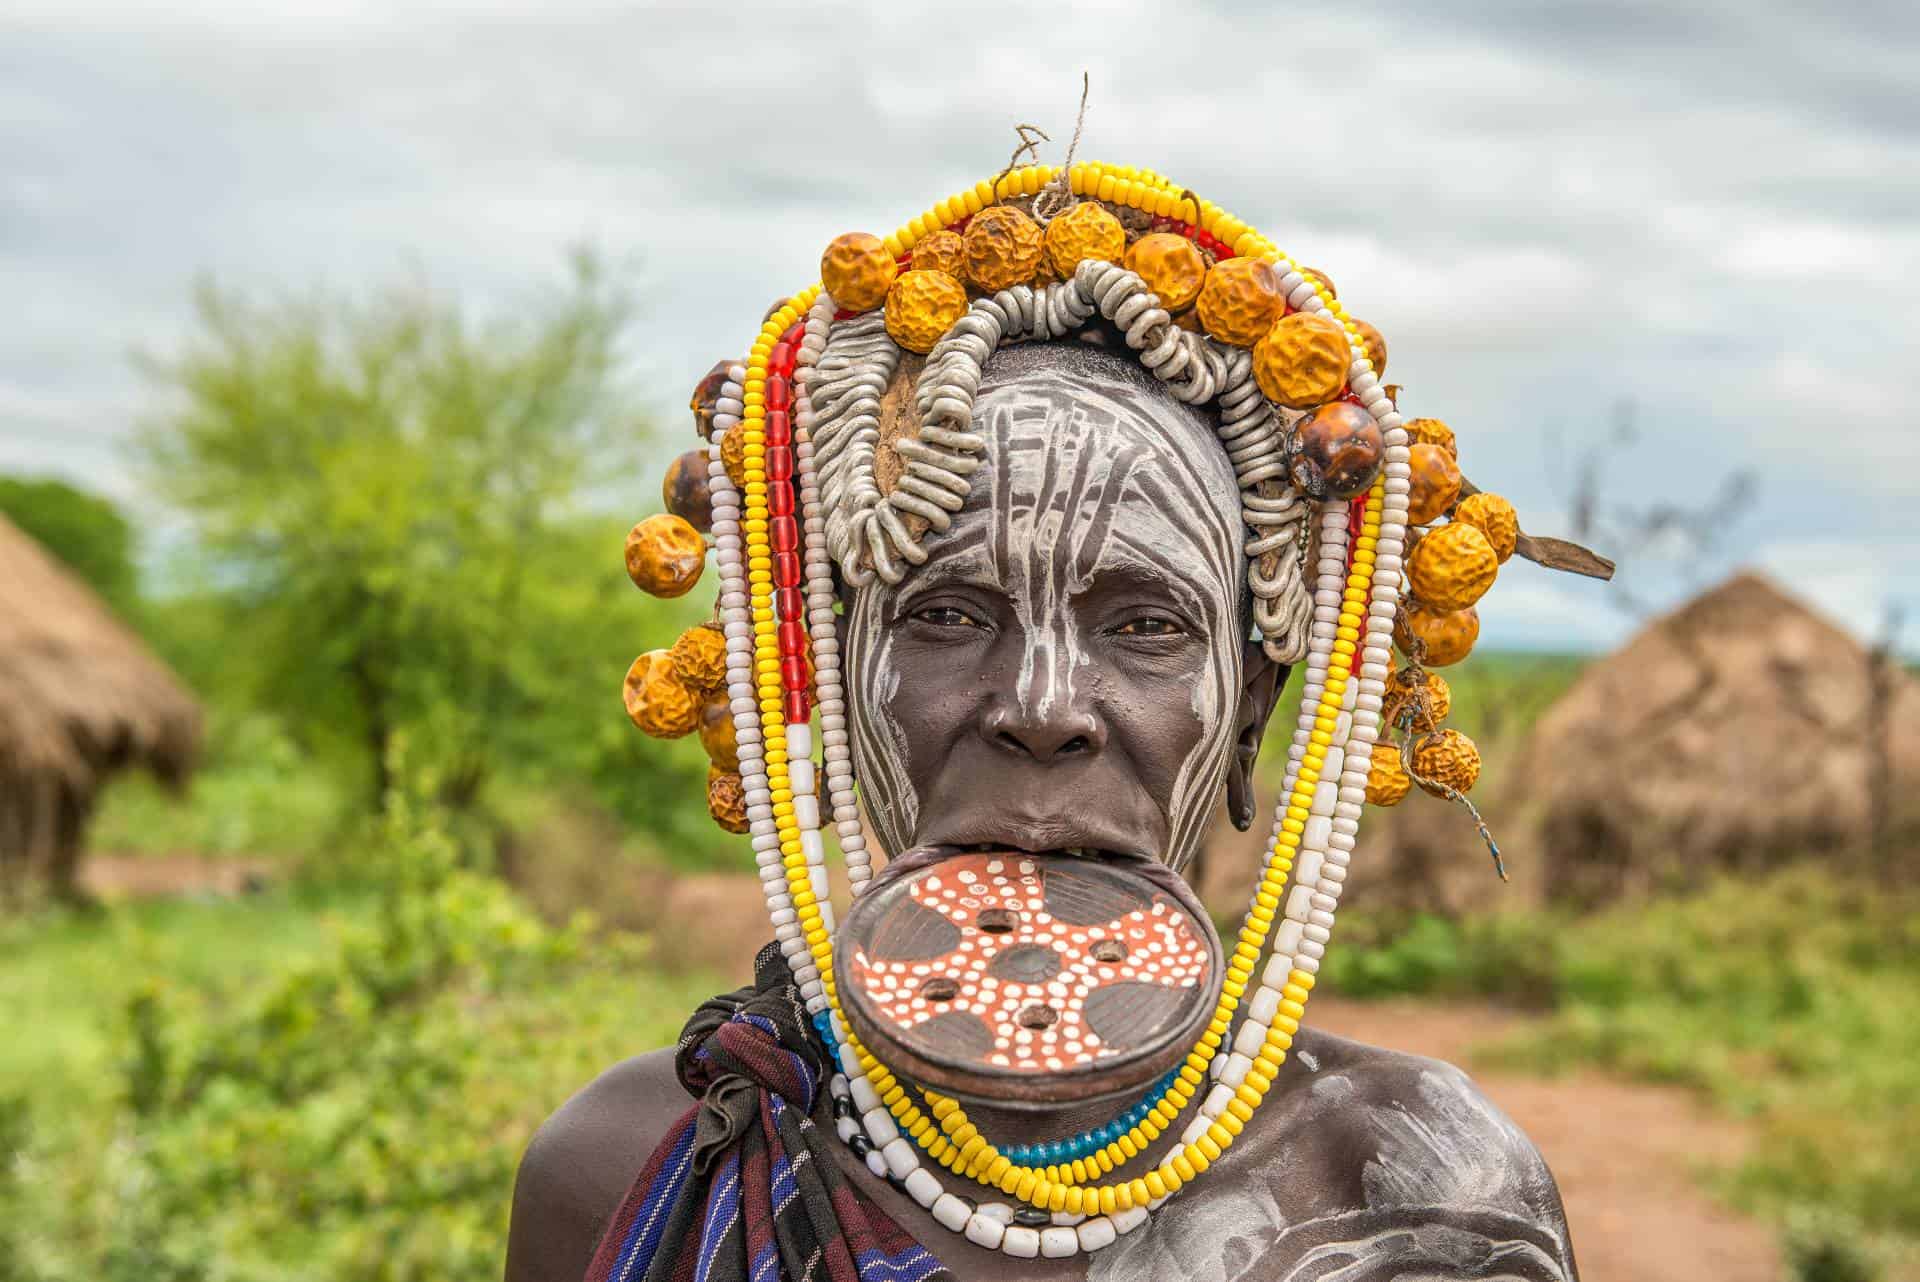 The Traditional Lip Plate Practice of the Mursi Tribe